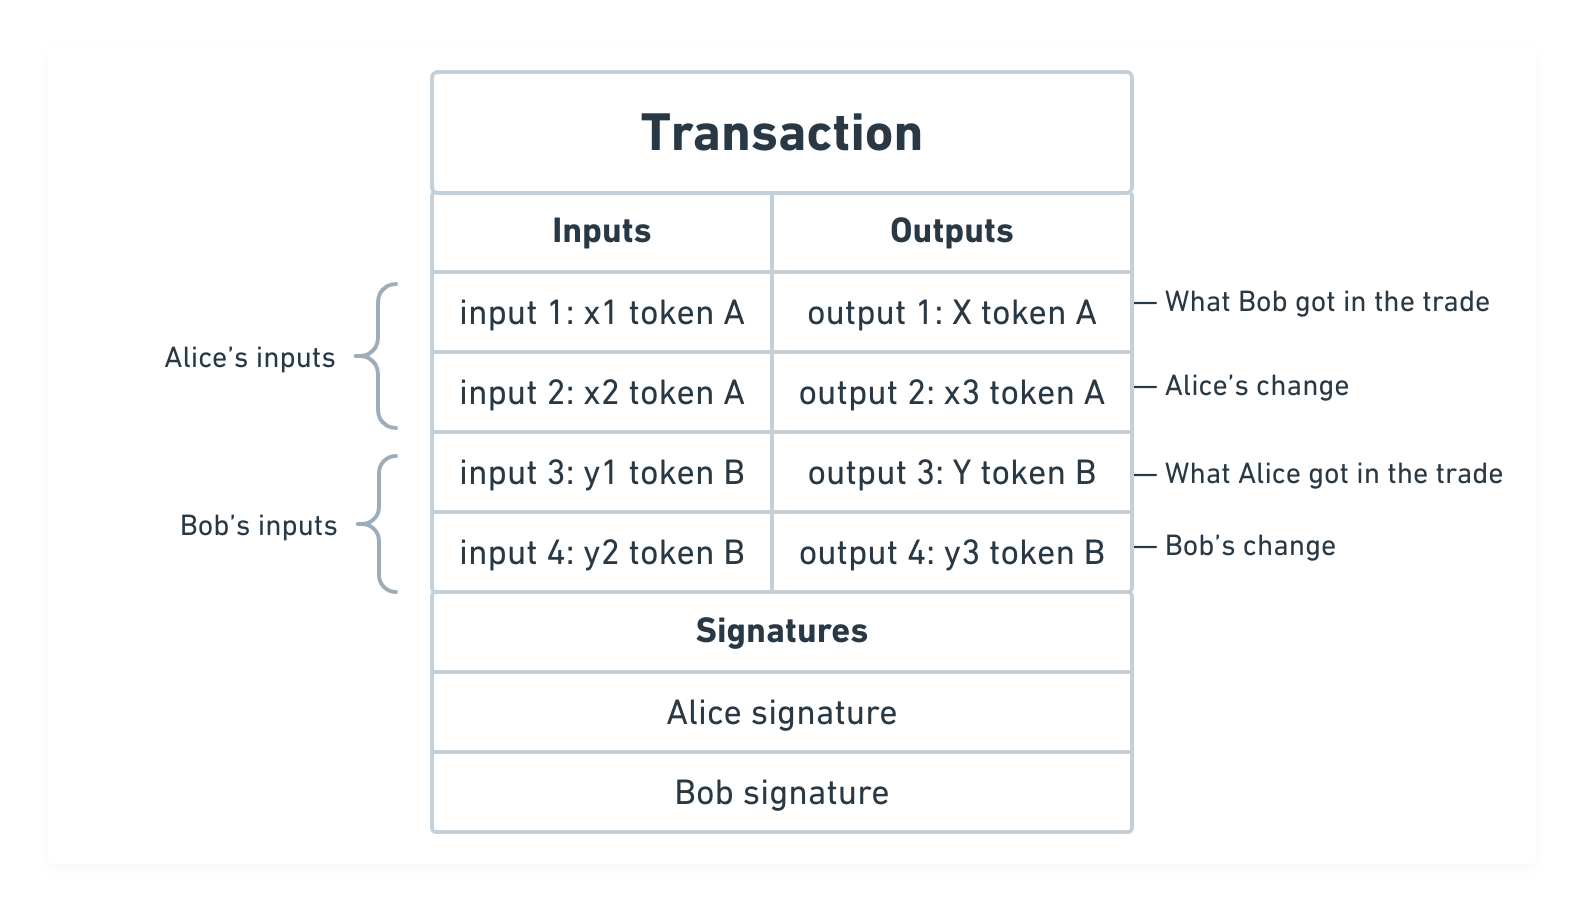 Transaction process of a wallet composed system